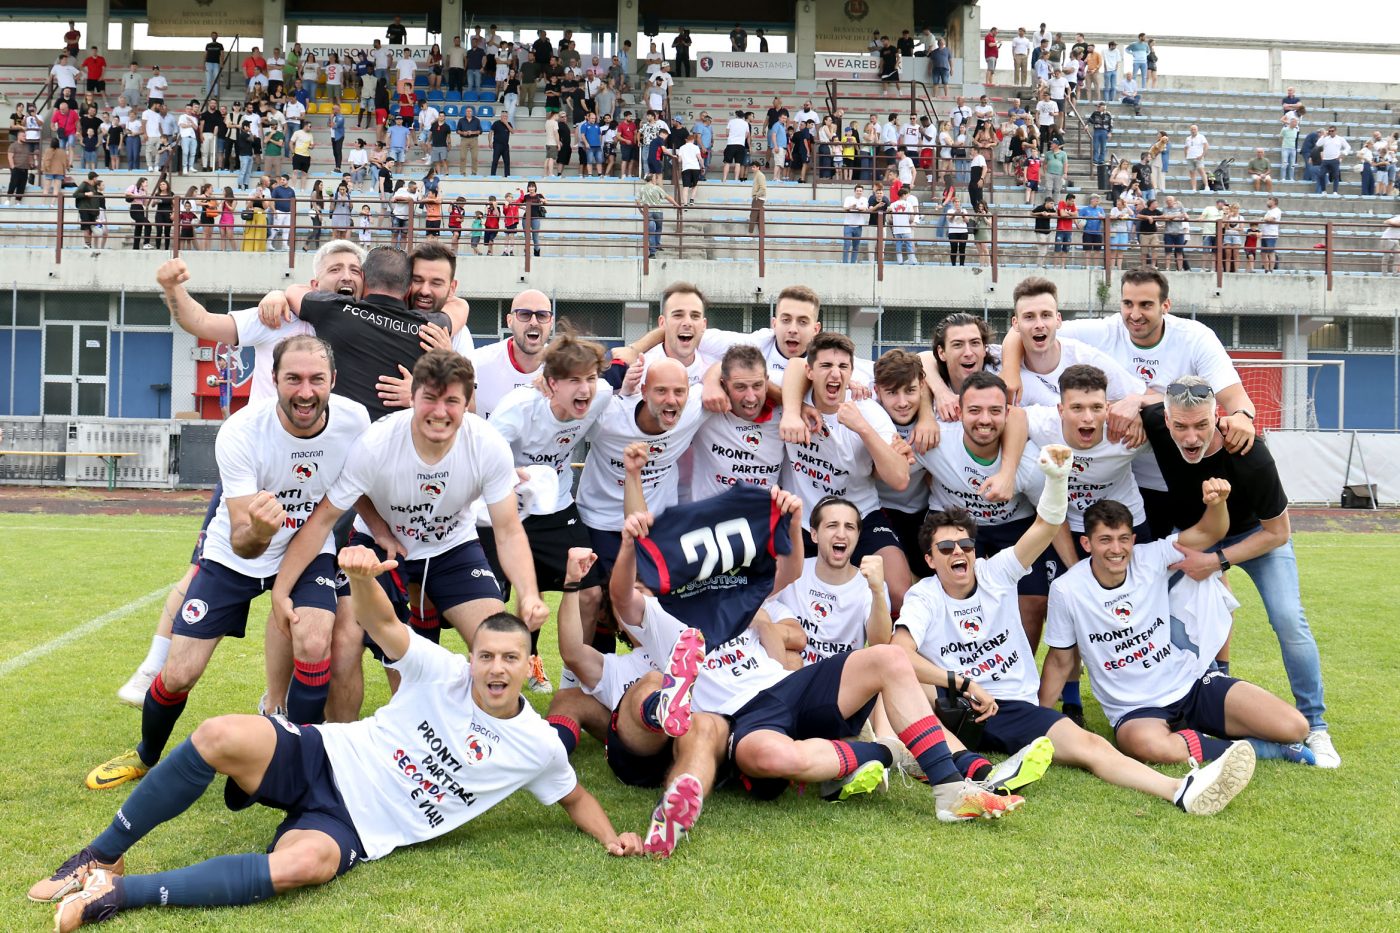 Football – Atlético Castiglione defeats Voltesse (2-1) and flies into the second category